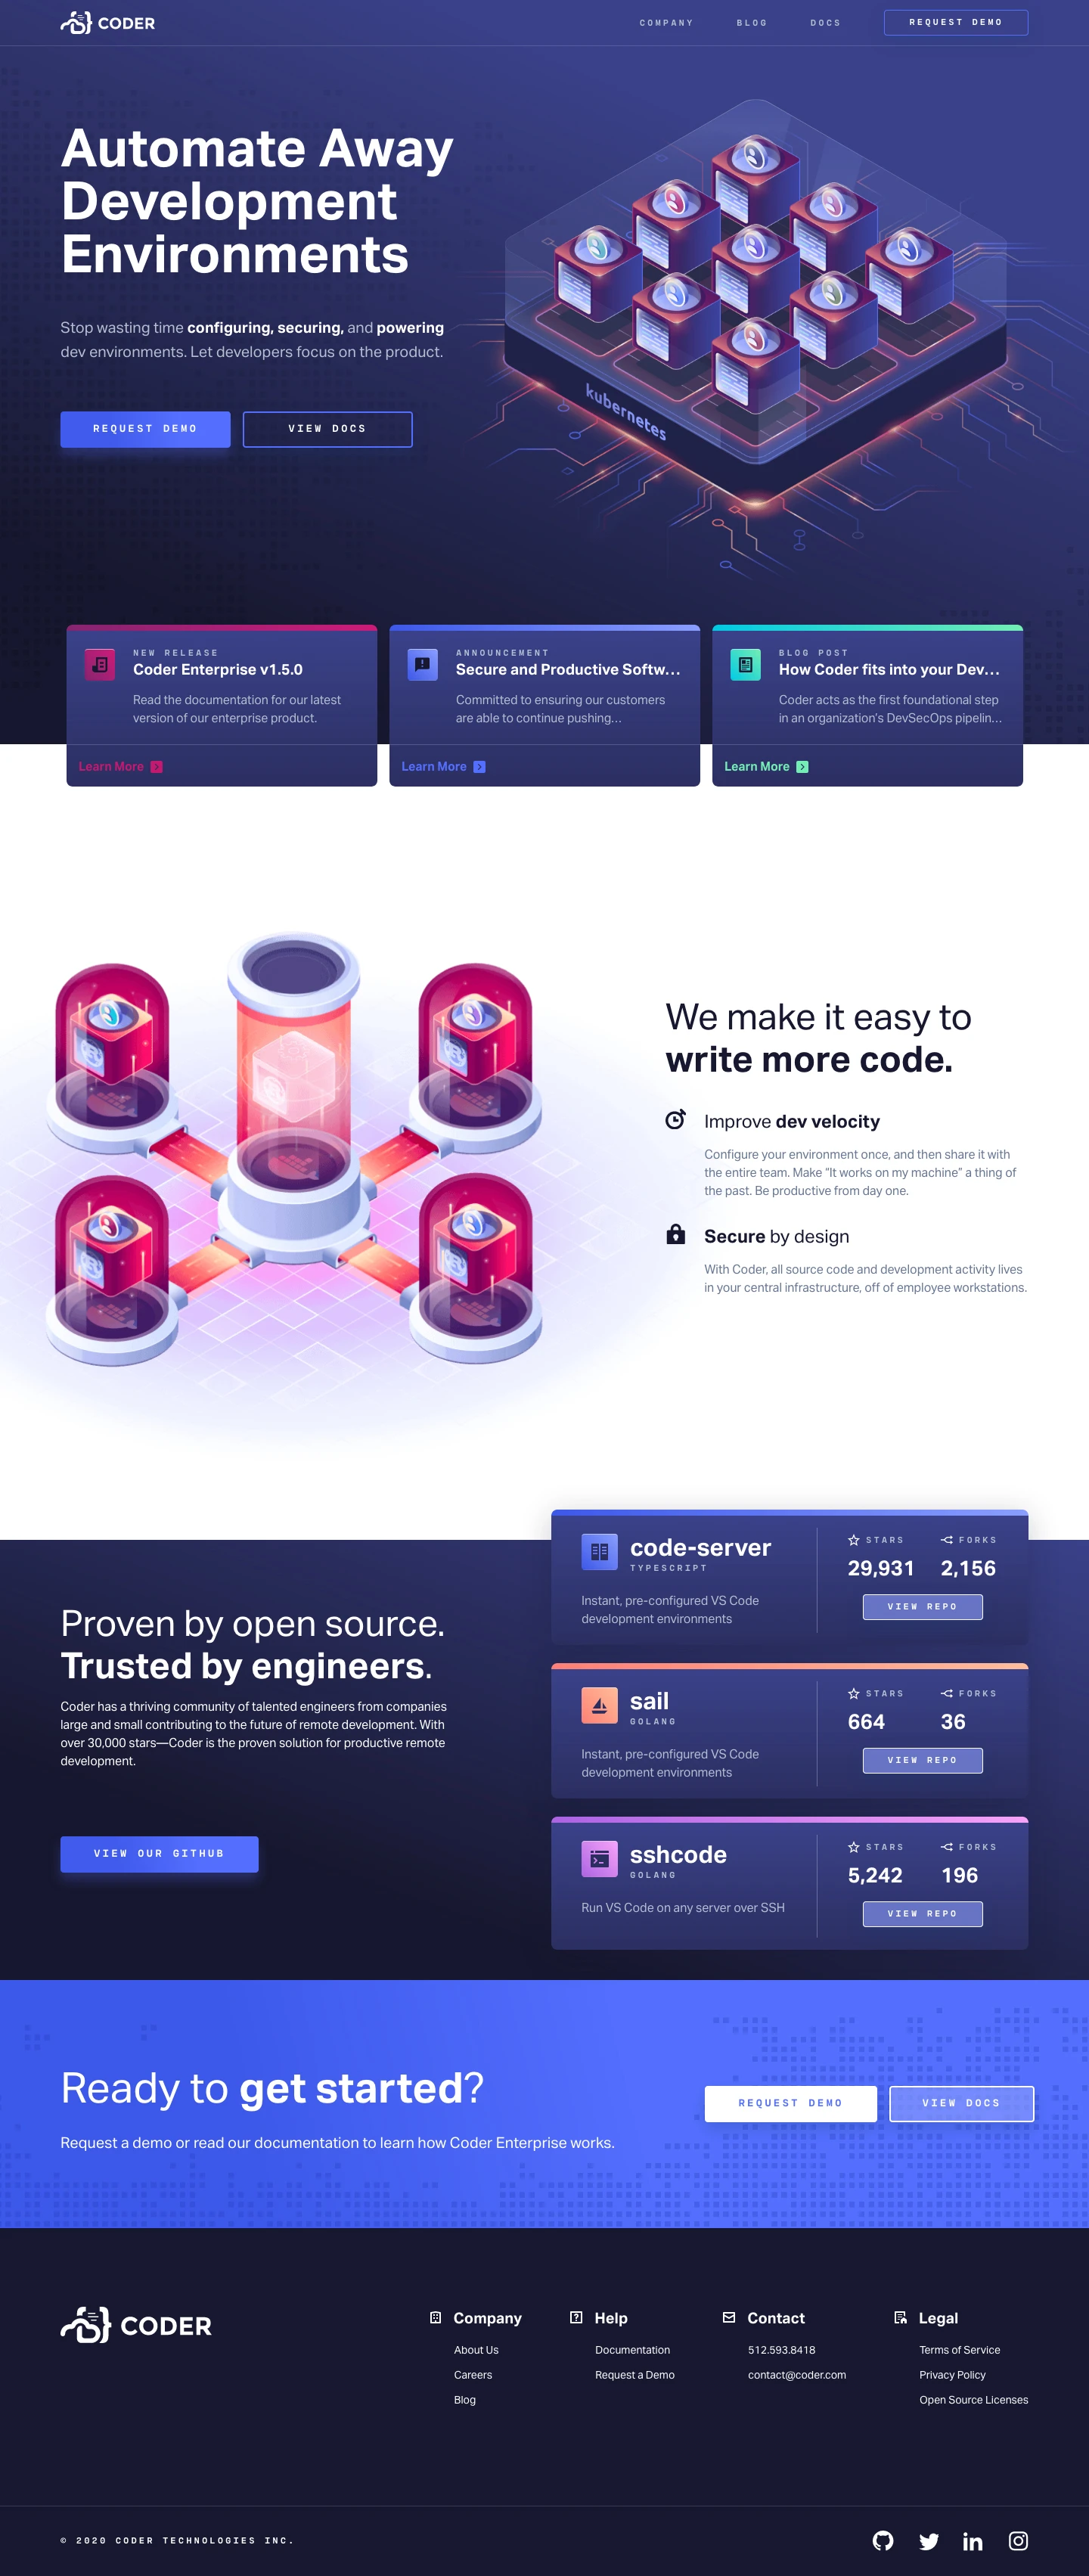 Coder Landing Page Example: Coder provides open-source tools and an enterprise platform that makes it easier than ever to configure, secure and scale development environments.